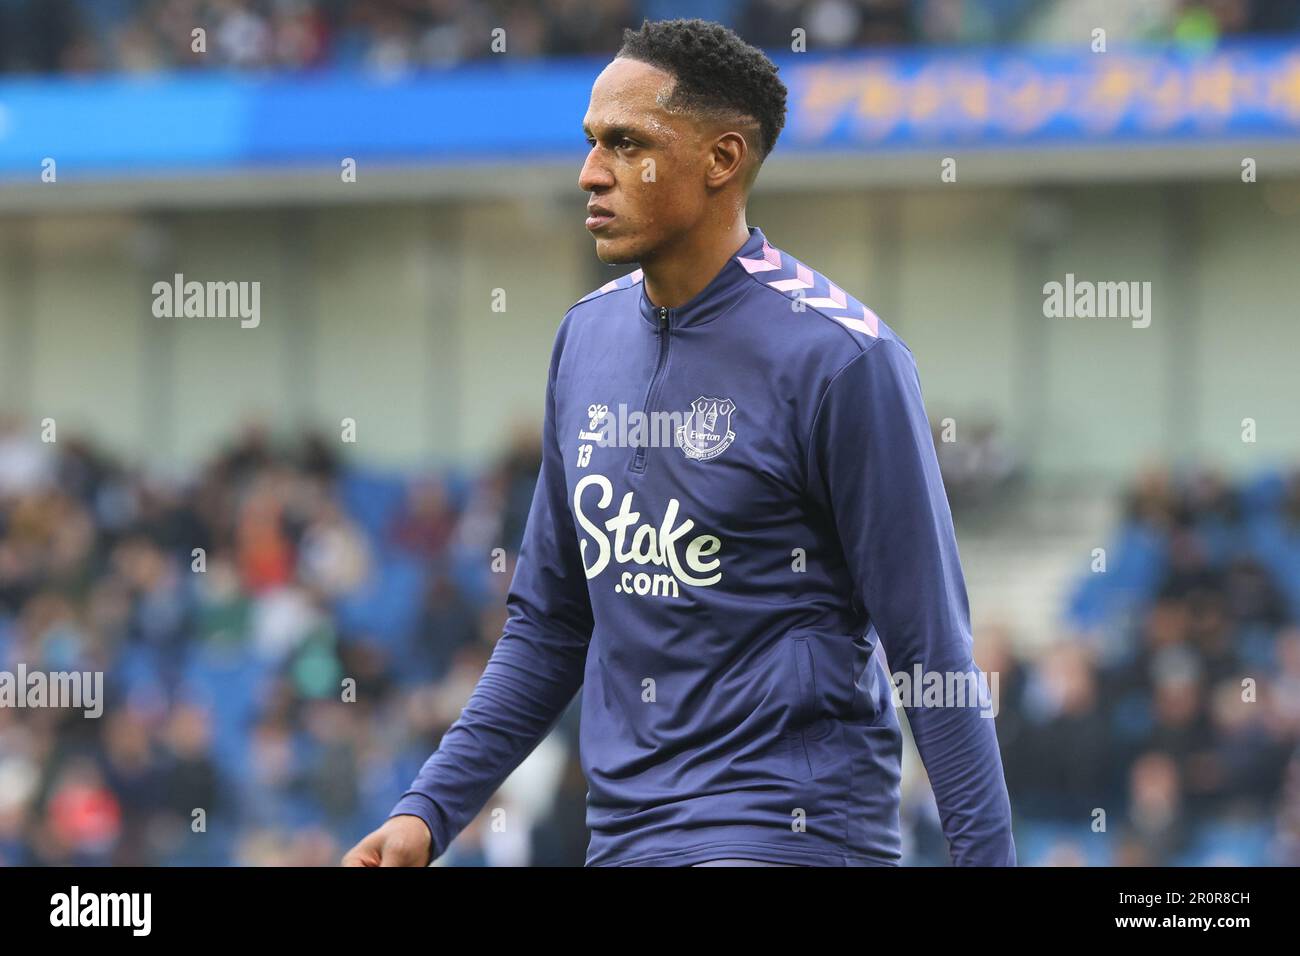 Yerry Mina warms up for Everton FC before their match against Brighton & Hove Albion at the AMEX Stadium Stock Photo